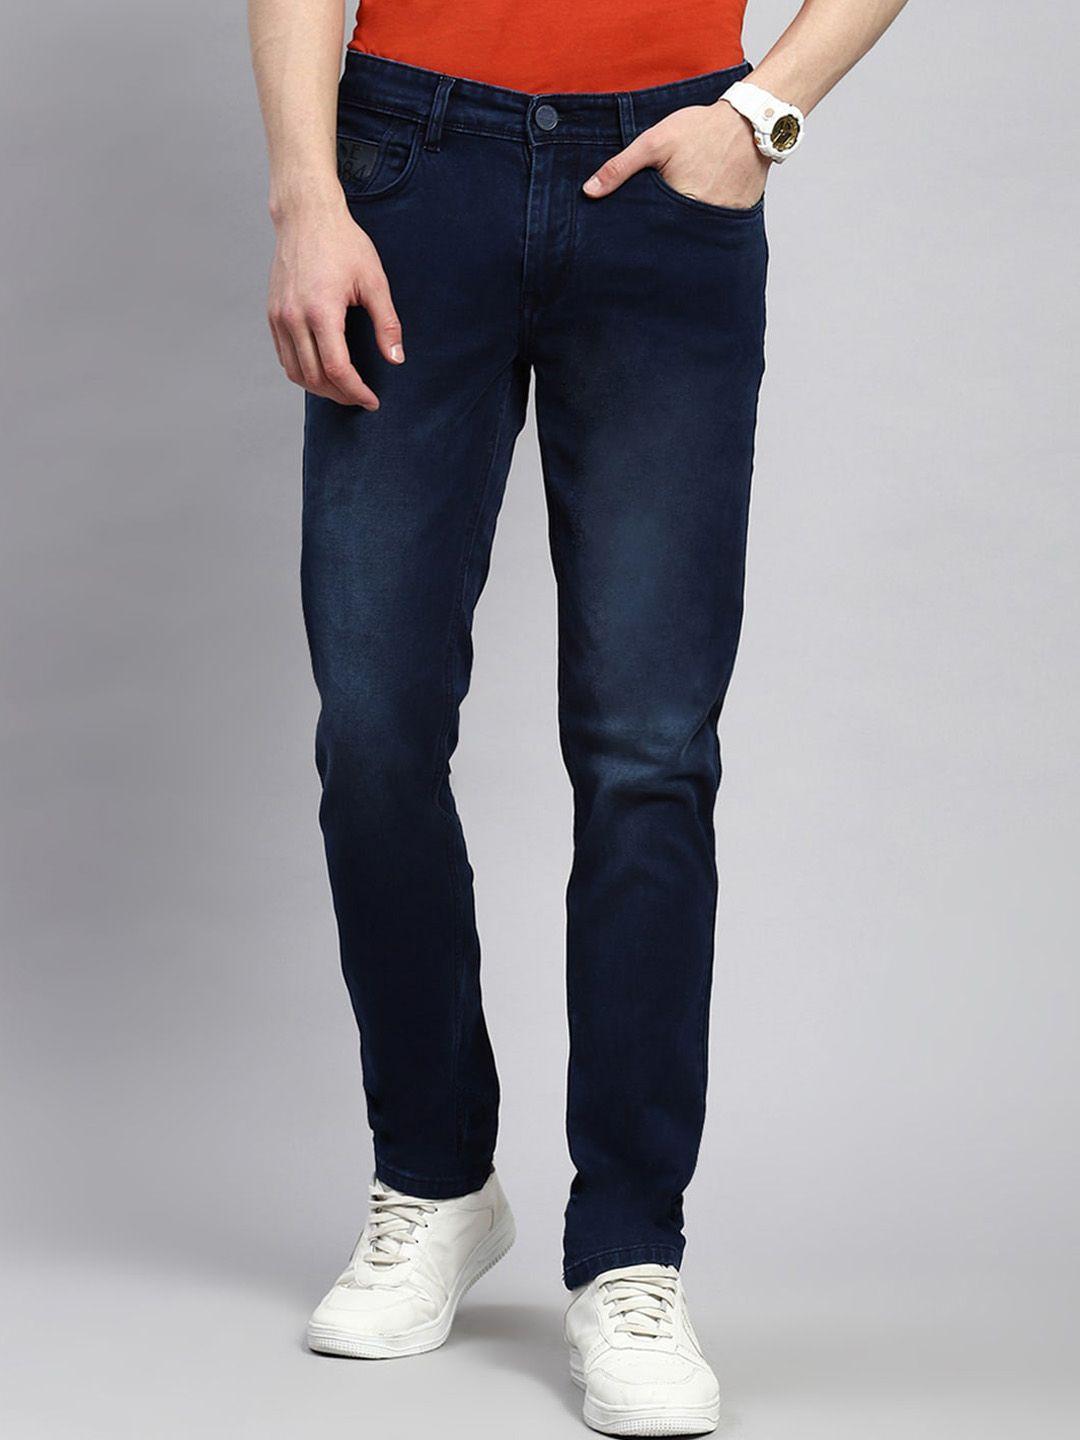 monte-carlo-men-mid-rise-light-fade-clean-look-jeans